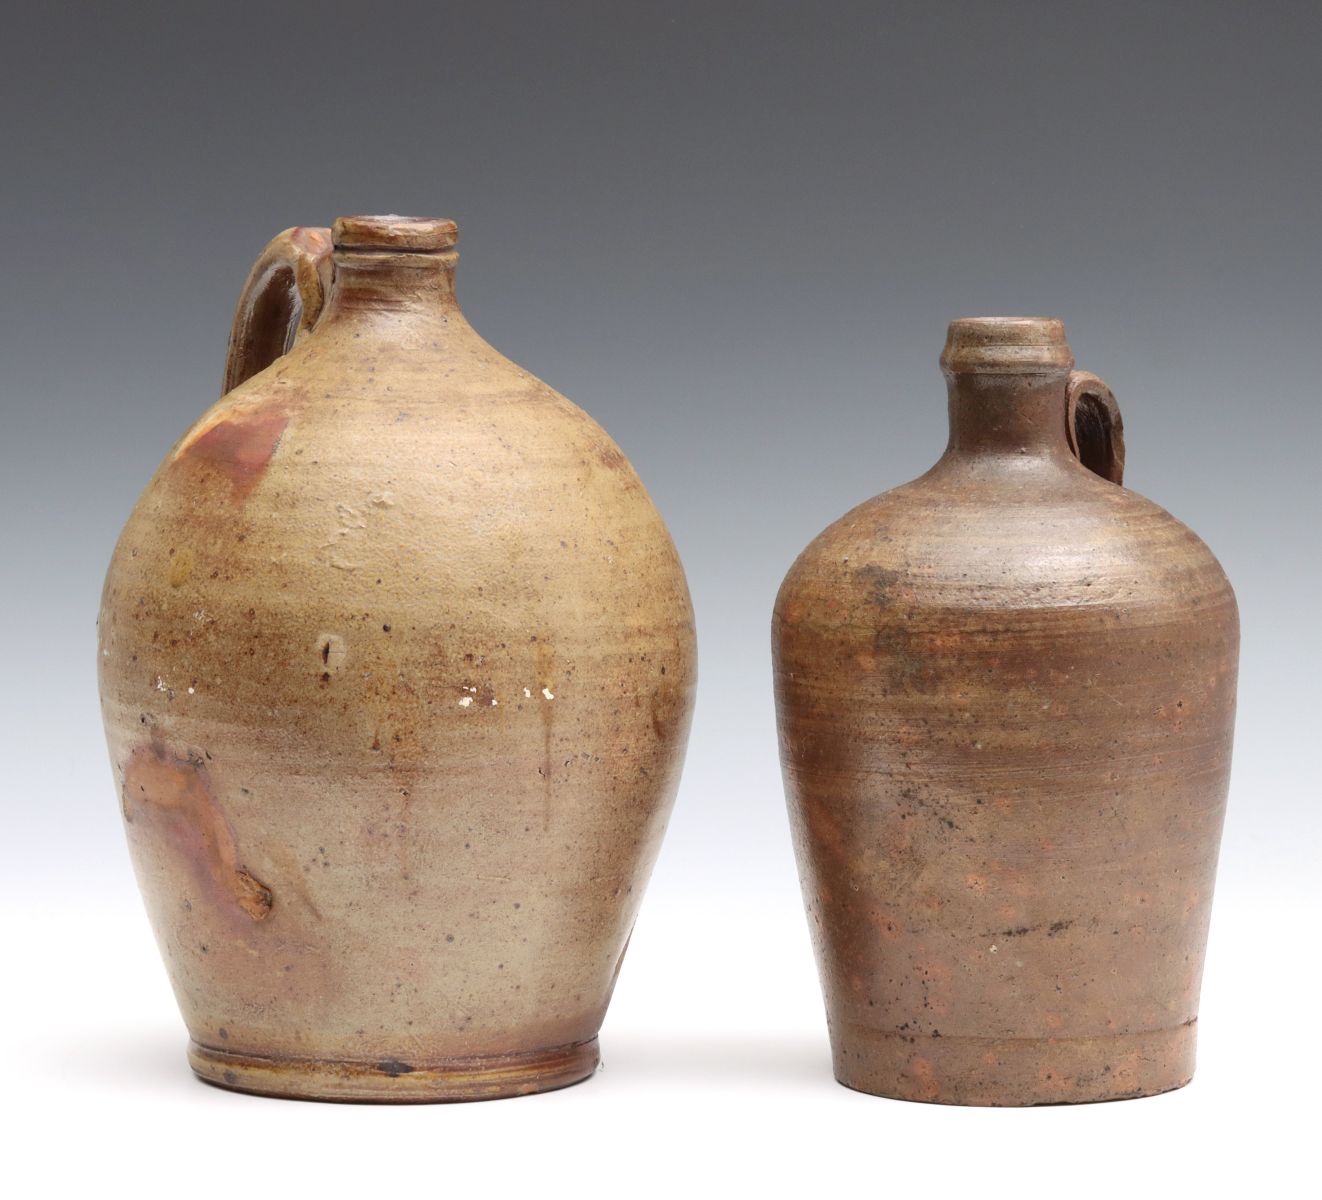 TWO EARLY 19TH C. SOUTHERN UNITED STATES POTTERY JUGS